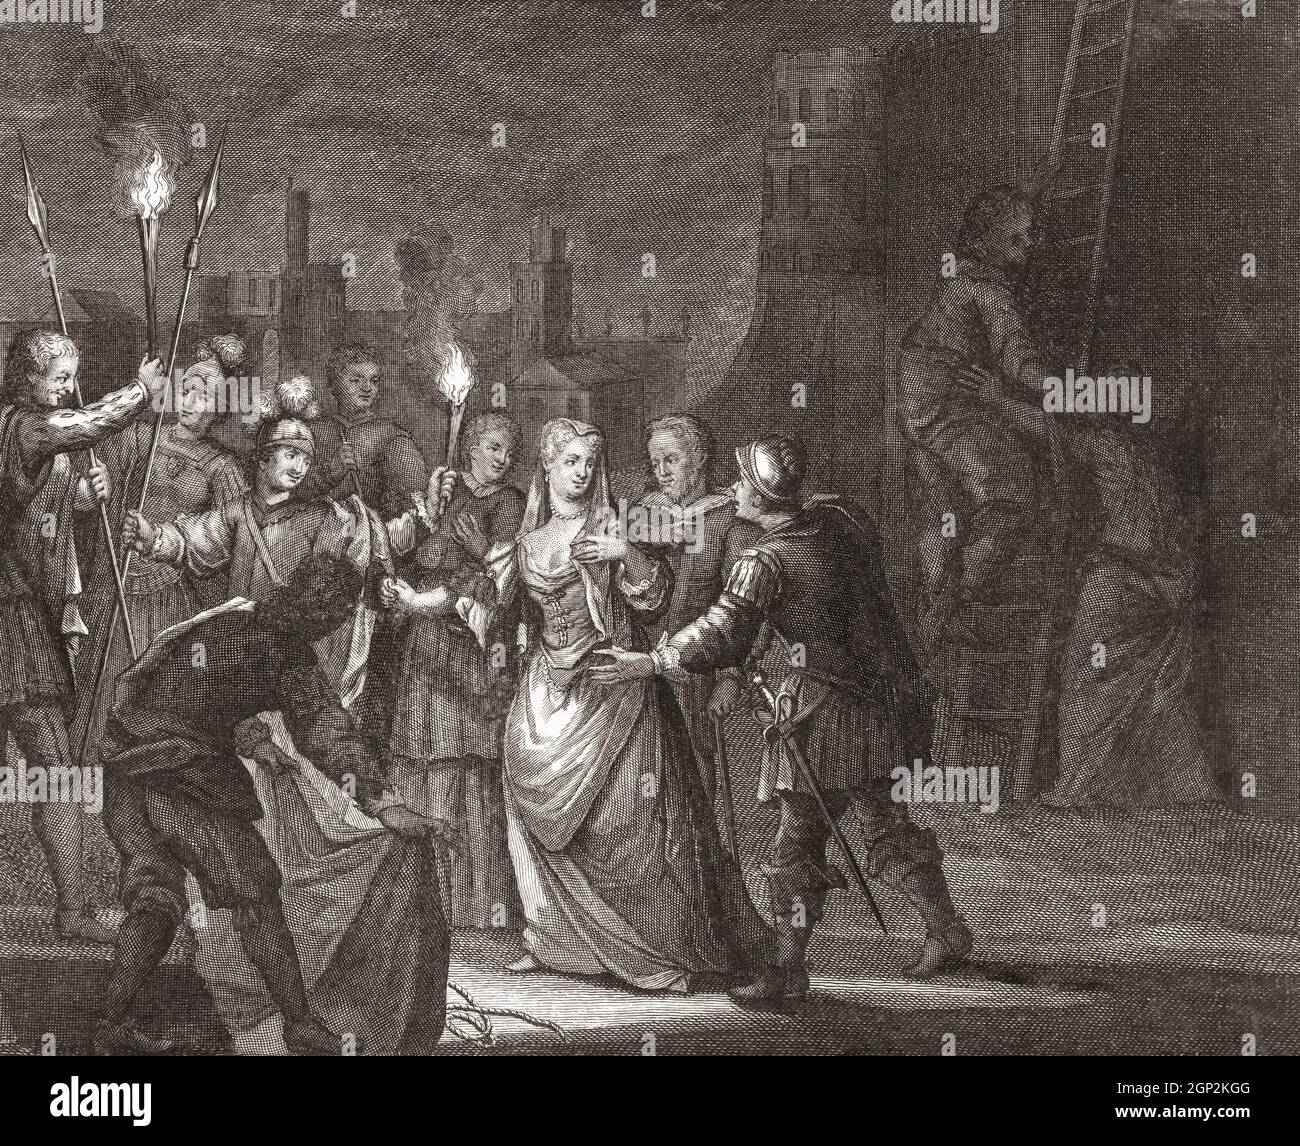 Marie de Medici, 1573 - 1642. Queen of France as the second wife of King Henry IV.  Here seen escaping with the aid of sympathizers from Blois castle after being exiled there by her son King Louis XIII.  After an engraving by Philip van Gunst. Stock Photo